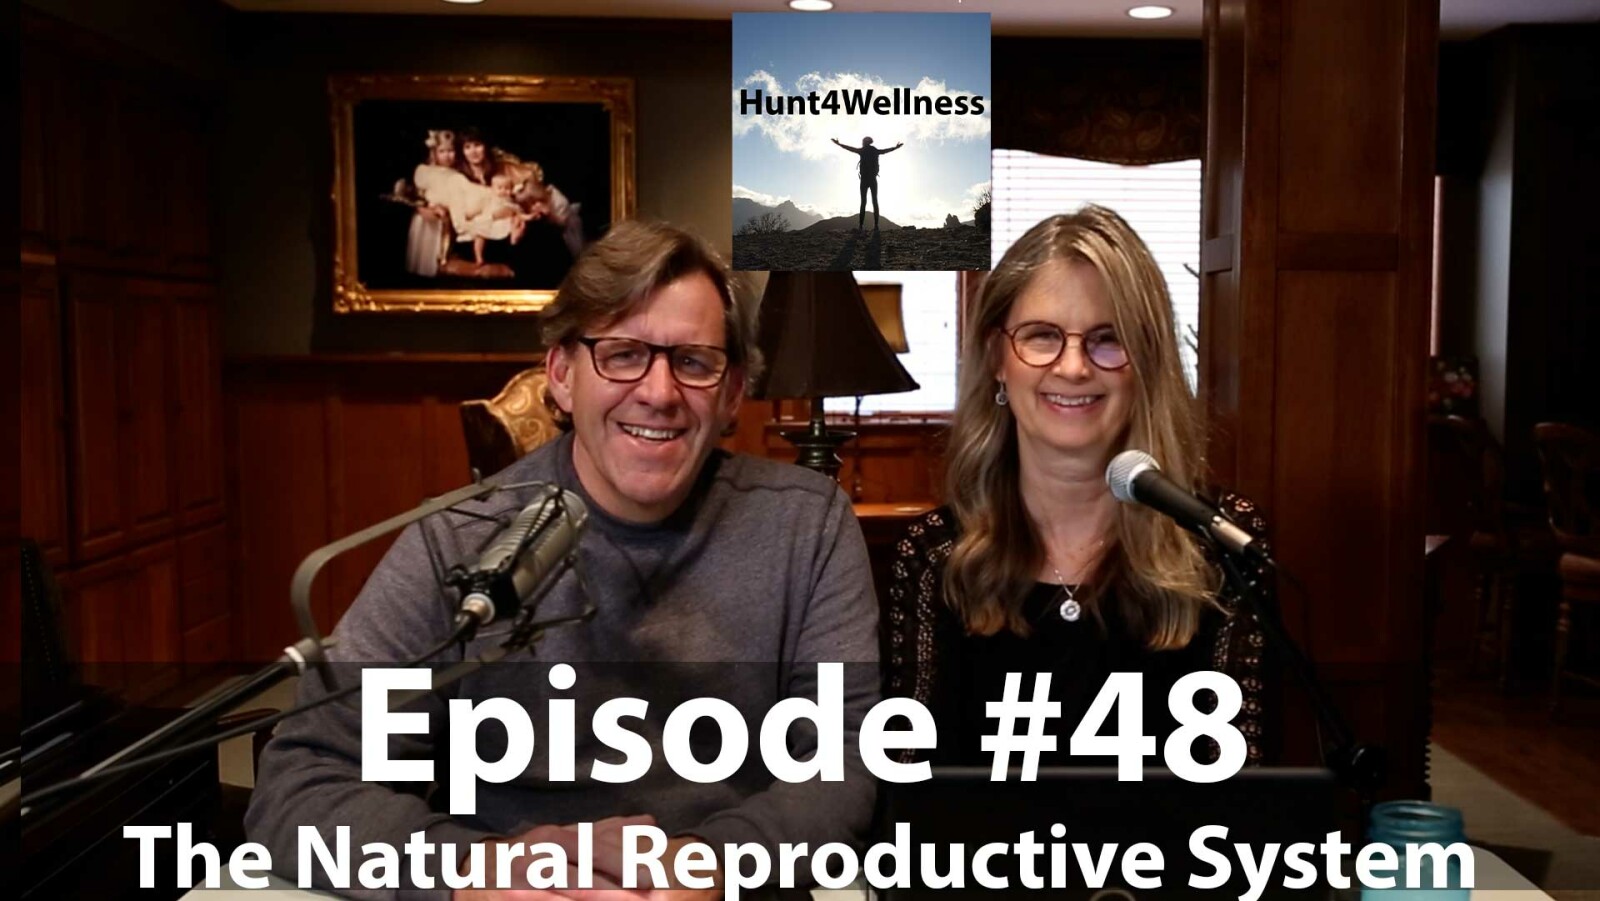 Episode #48 - The Natural Reproductive System